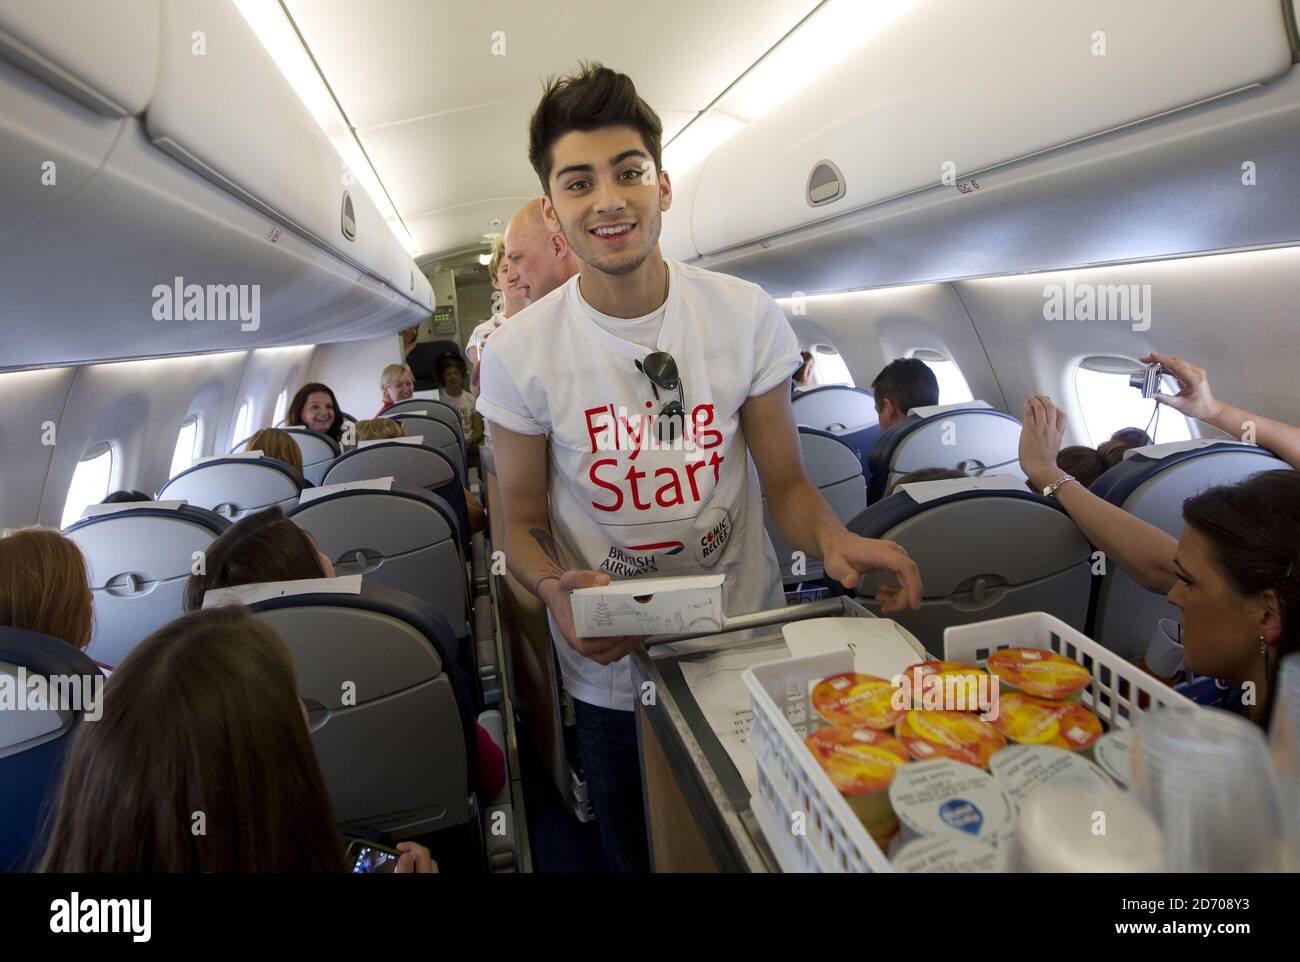 Zayn Malik Of One Direction Serves Drinks On Board Flight Ba1d A Private Charter Flight From London To Manchester Hosted By The Band For Competition Winners Which Raised A 50 000 For Flying